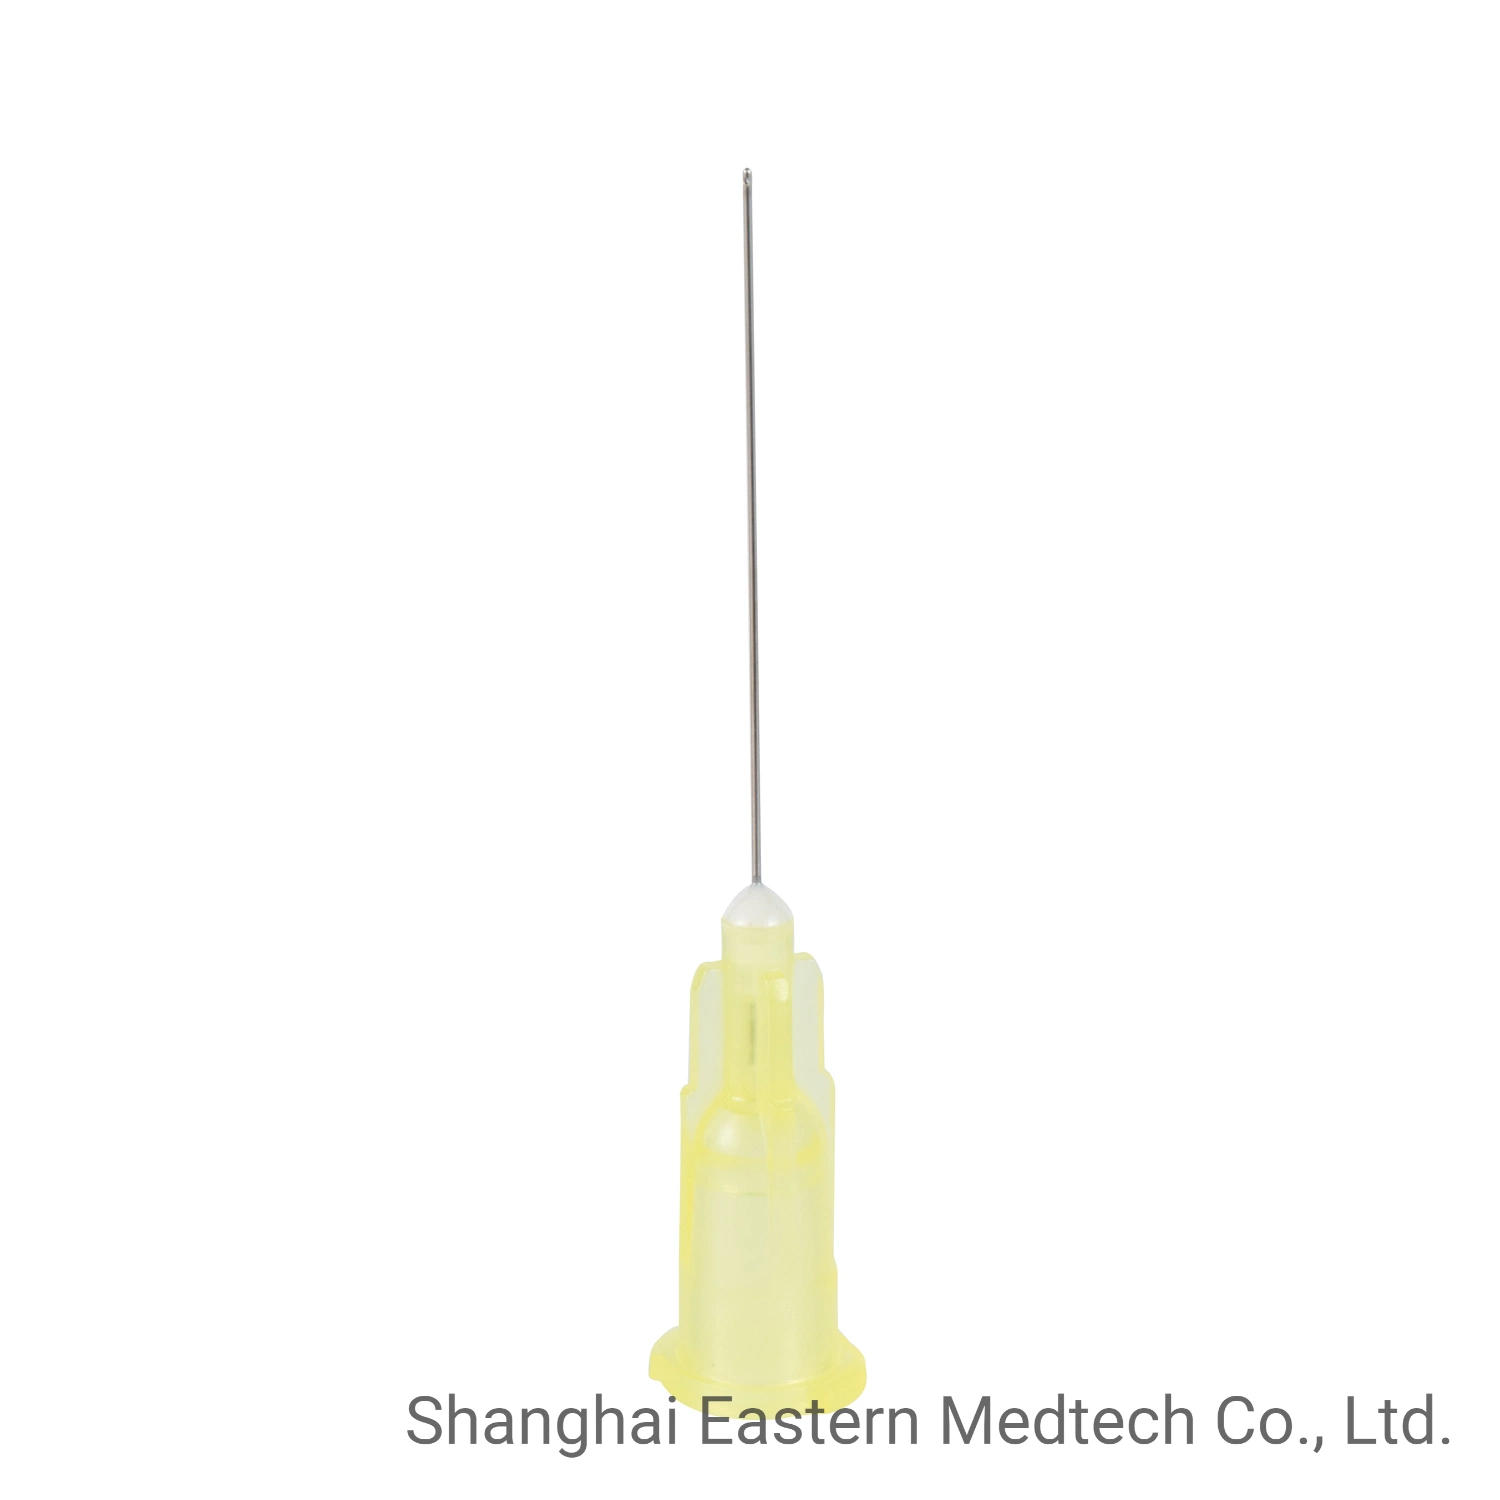 Disposable Medical Products for Dentist Use 23G/25g/ 27g / 30g Dental Application Needle